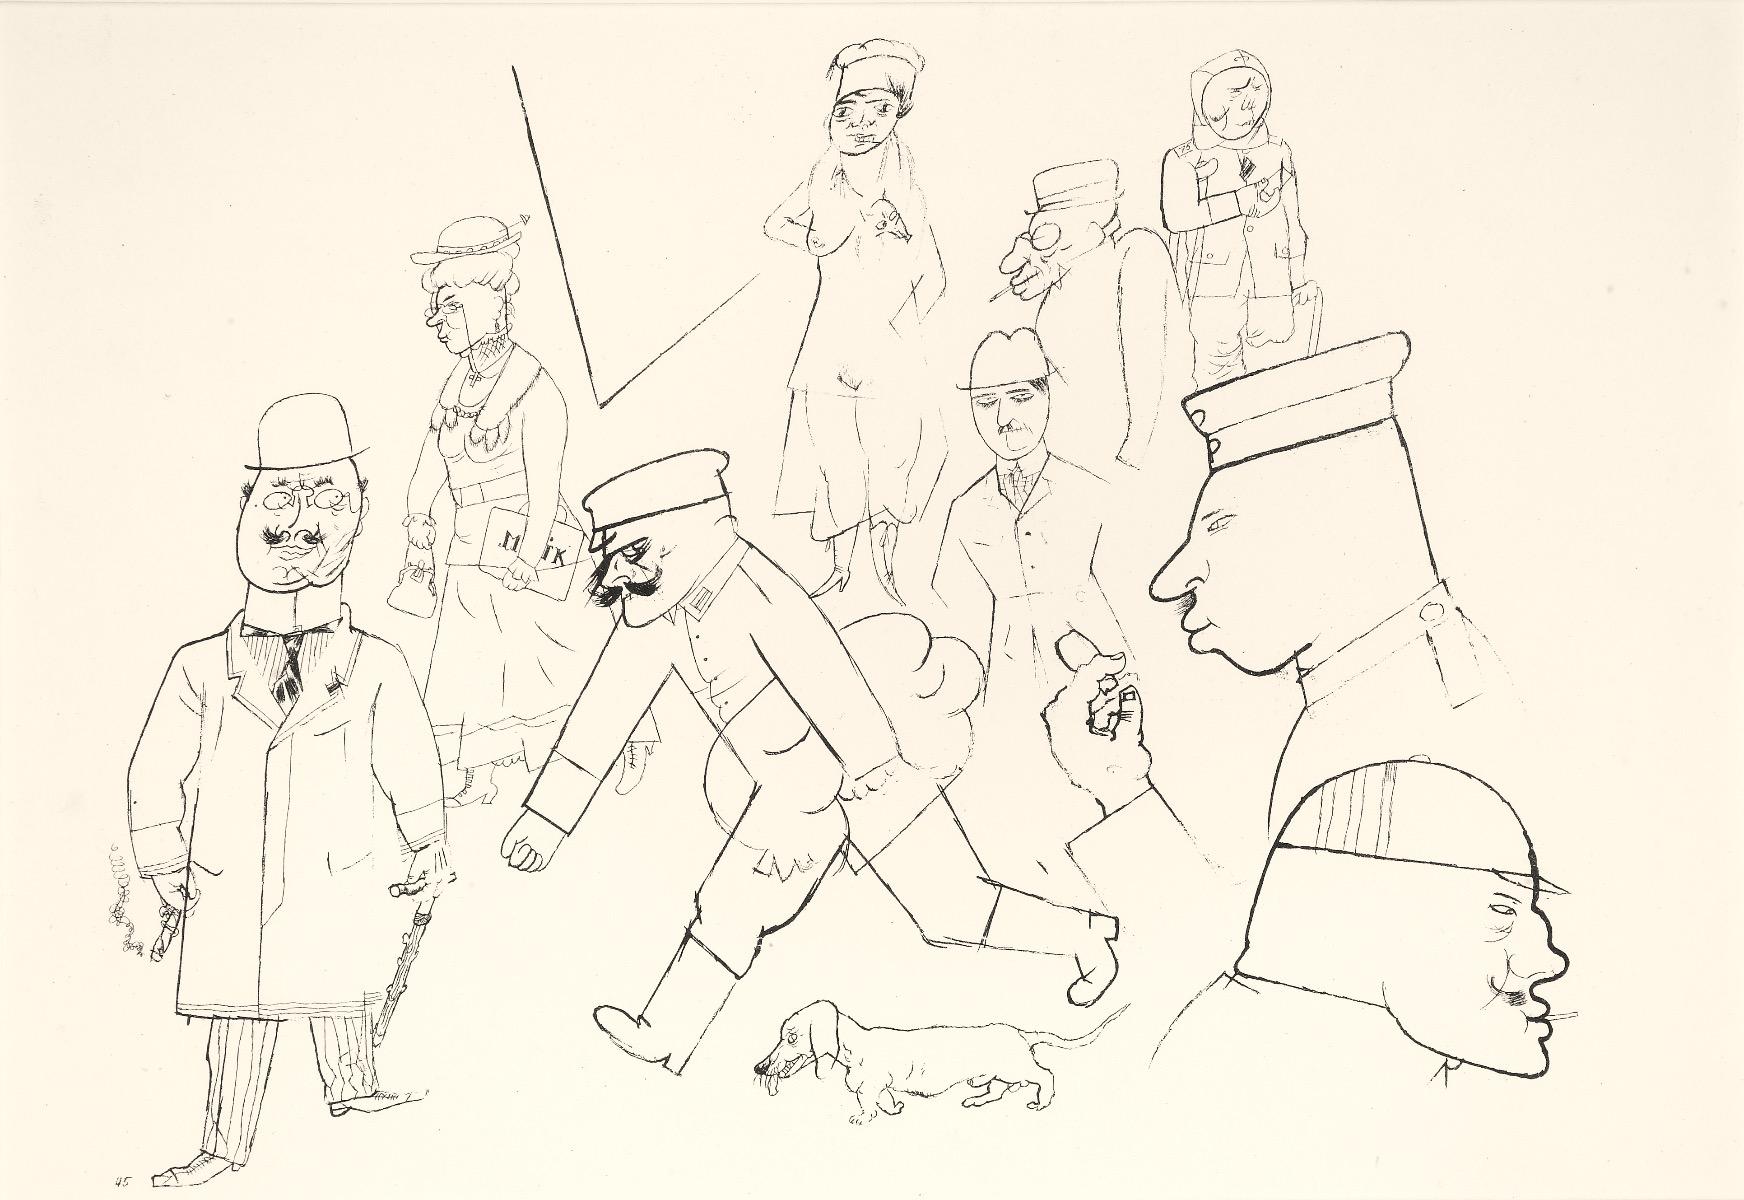 Strassenszene "Street scene" is an original lithograph, realized by George Grosz in 1923, from Ecce Homo,  edition Malik Verlag.

Included a frame.

In very good conditions.

George Grosz (1893 -1959) was a German artist known especially for his